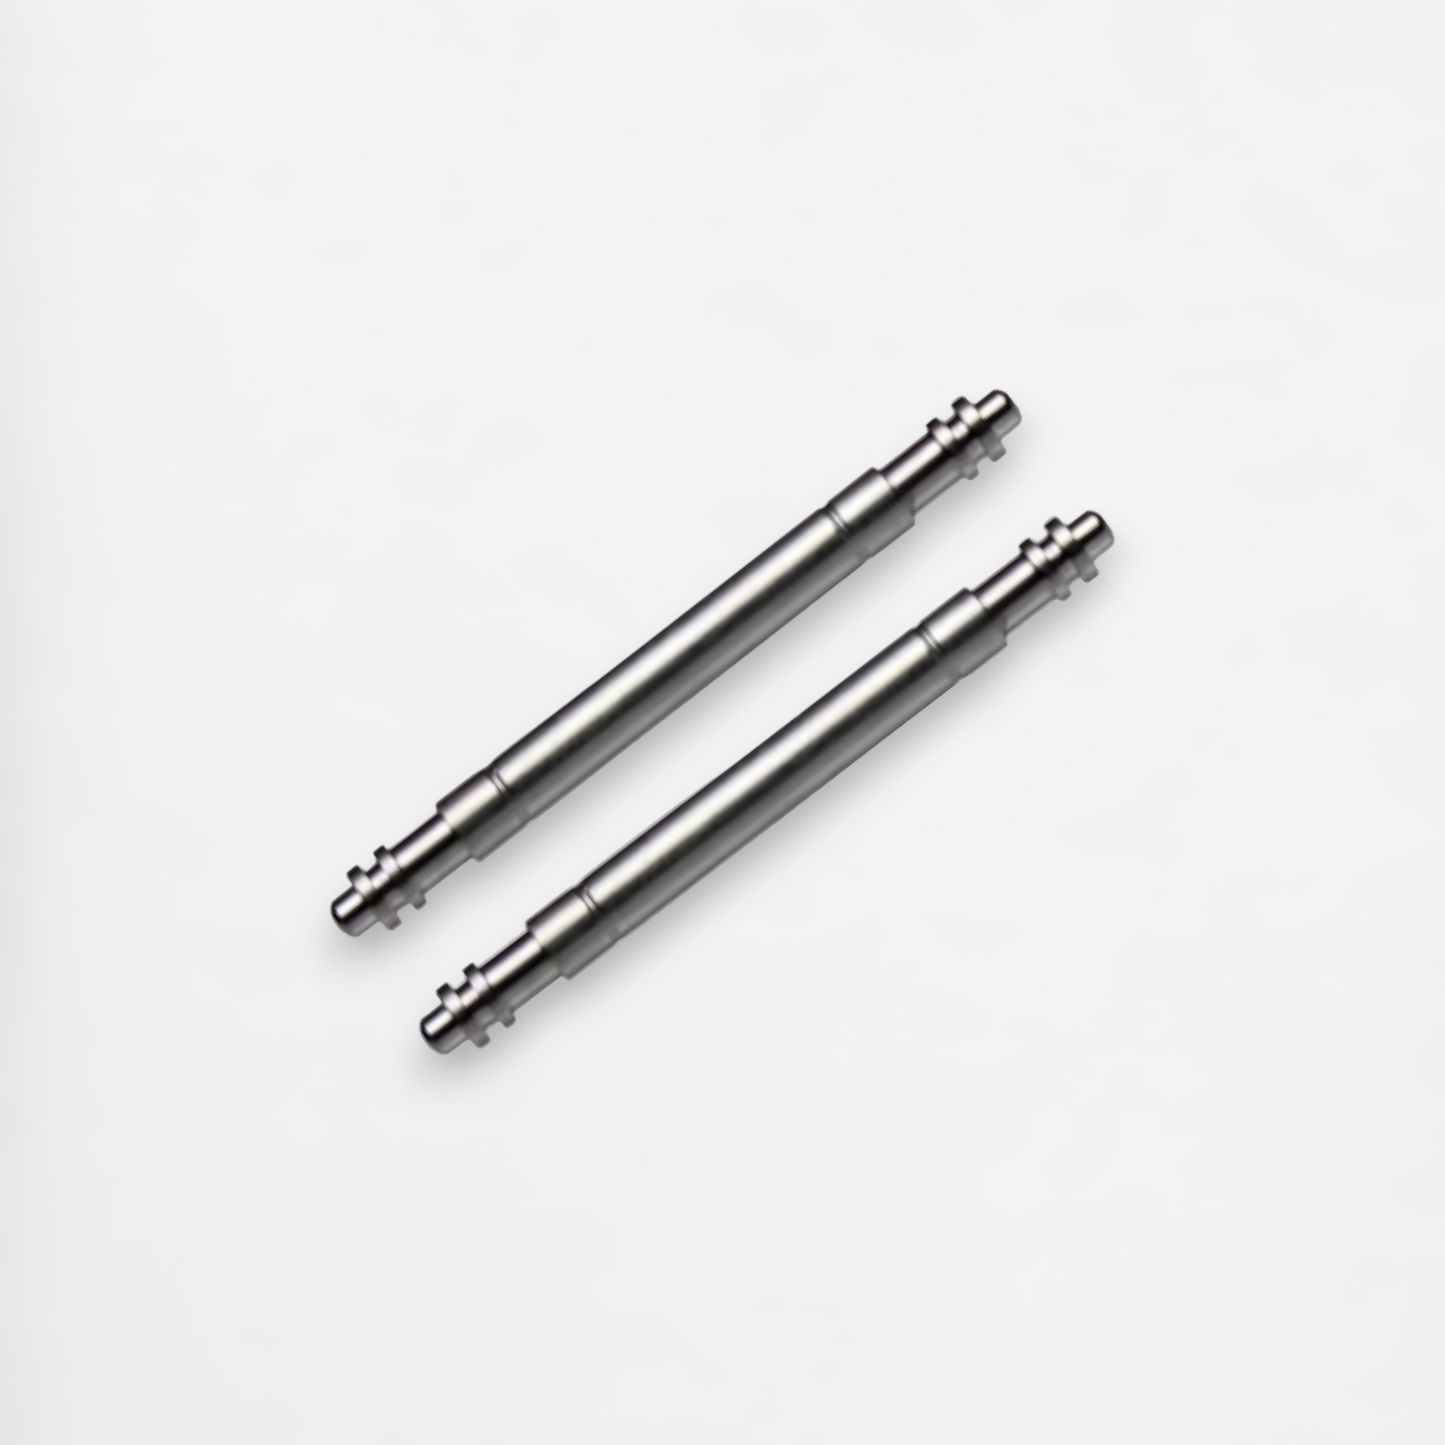 (20mm X 1.8mm) Spring Bars for Rolex Datejust 36mm (6-Digit)